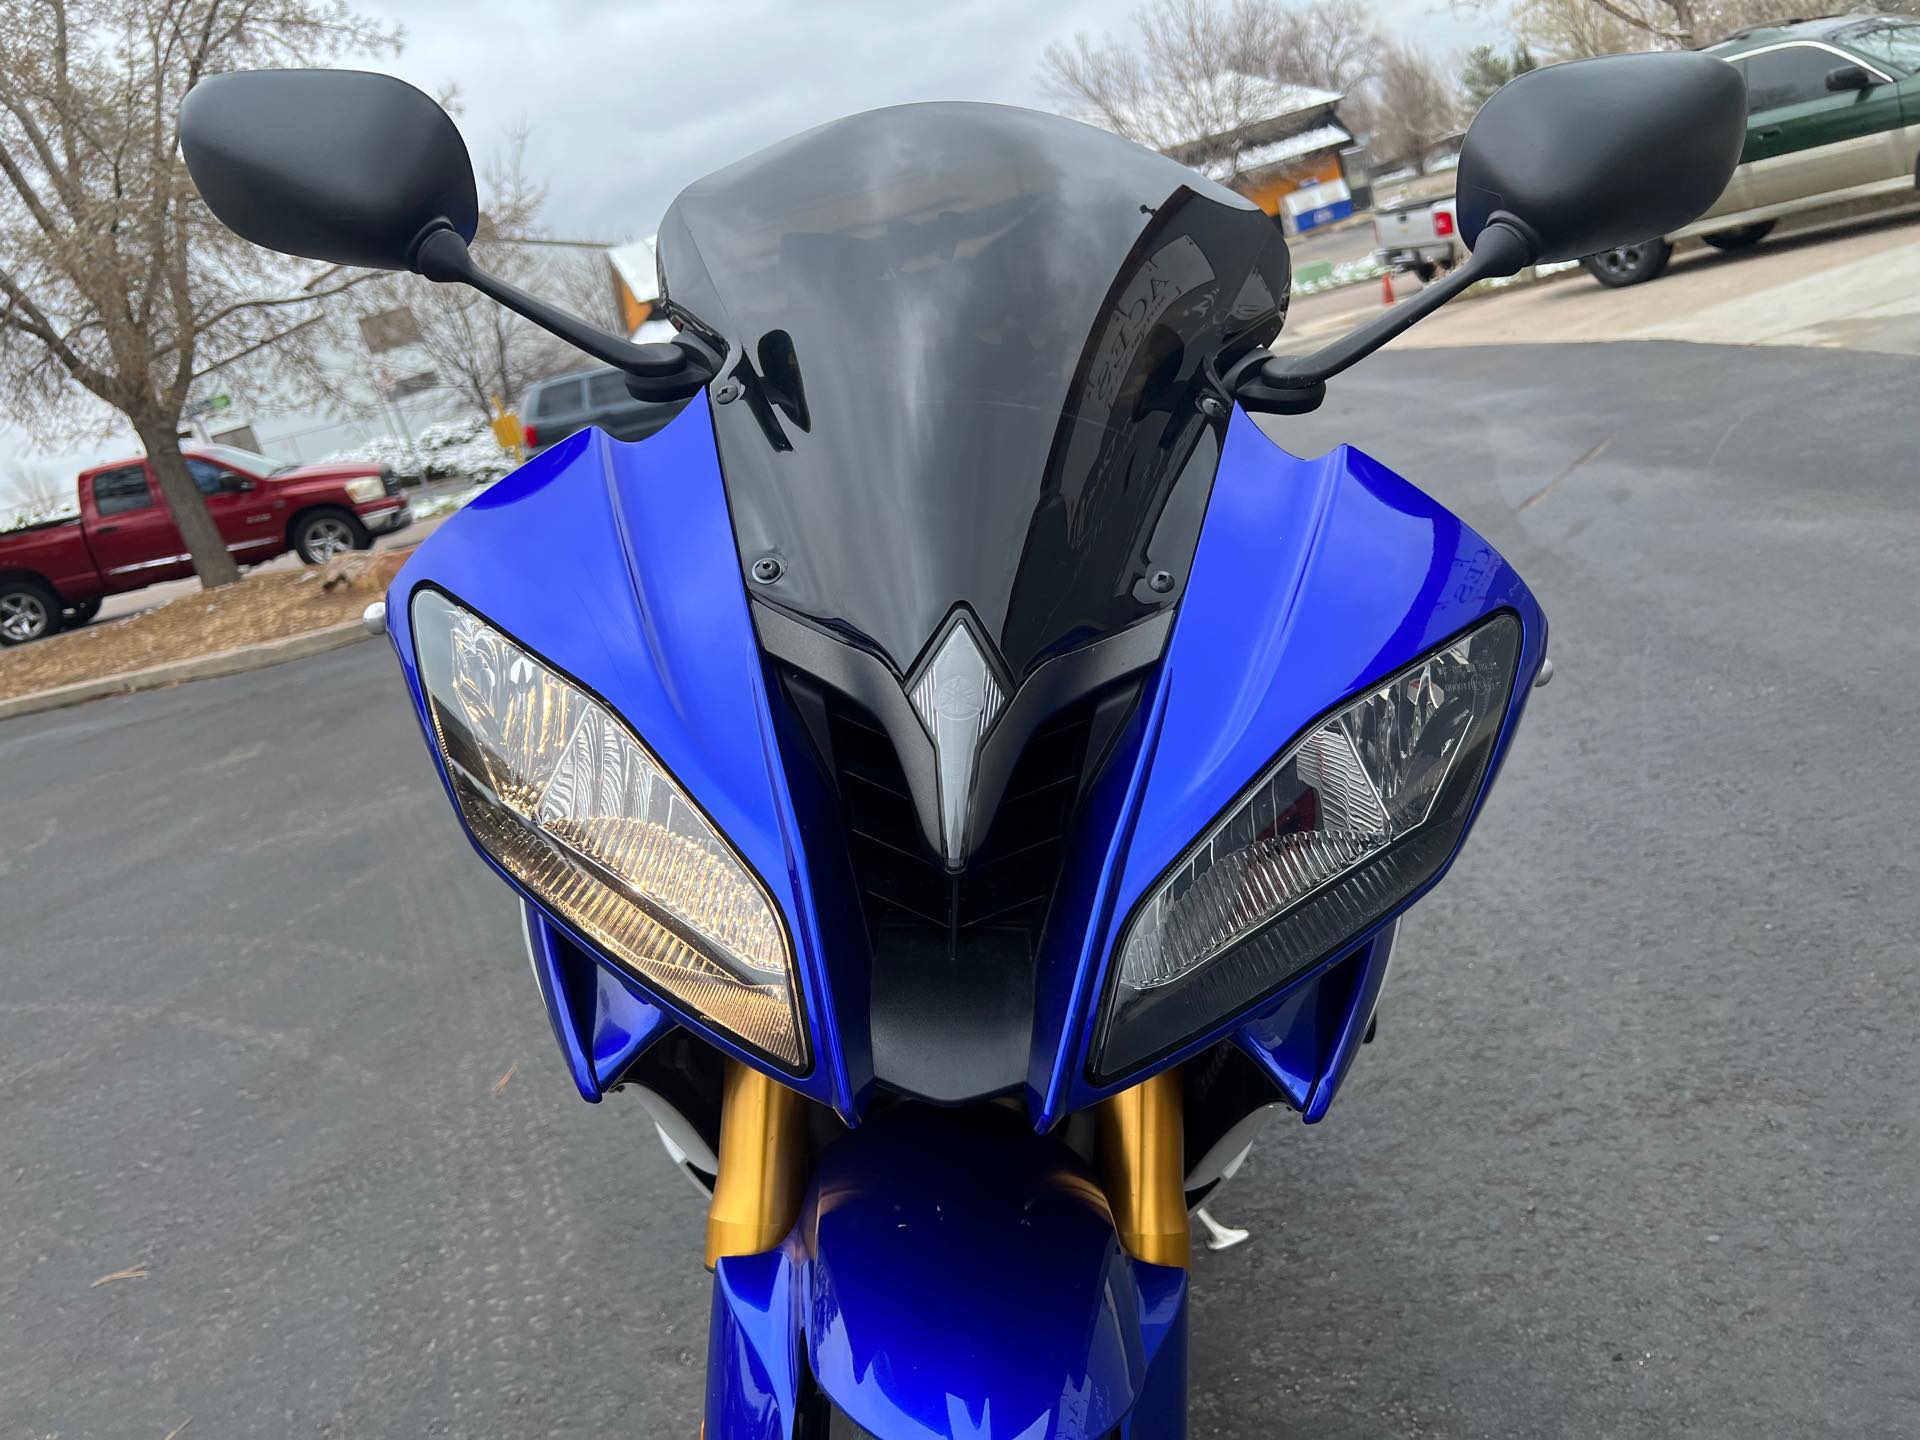 2010 Yamaha YZF R6 at Aces Motorcycles - Fort Collins